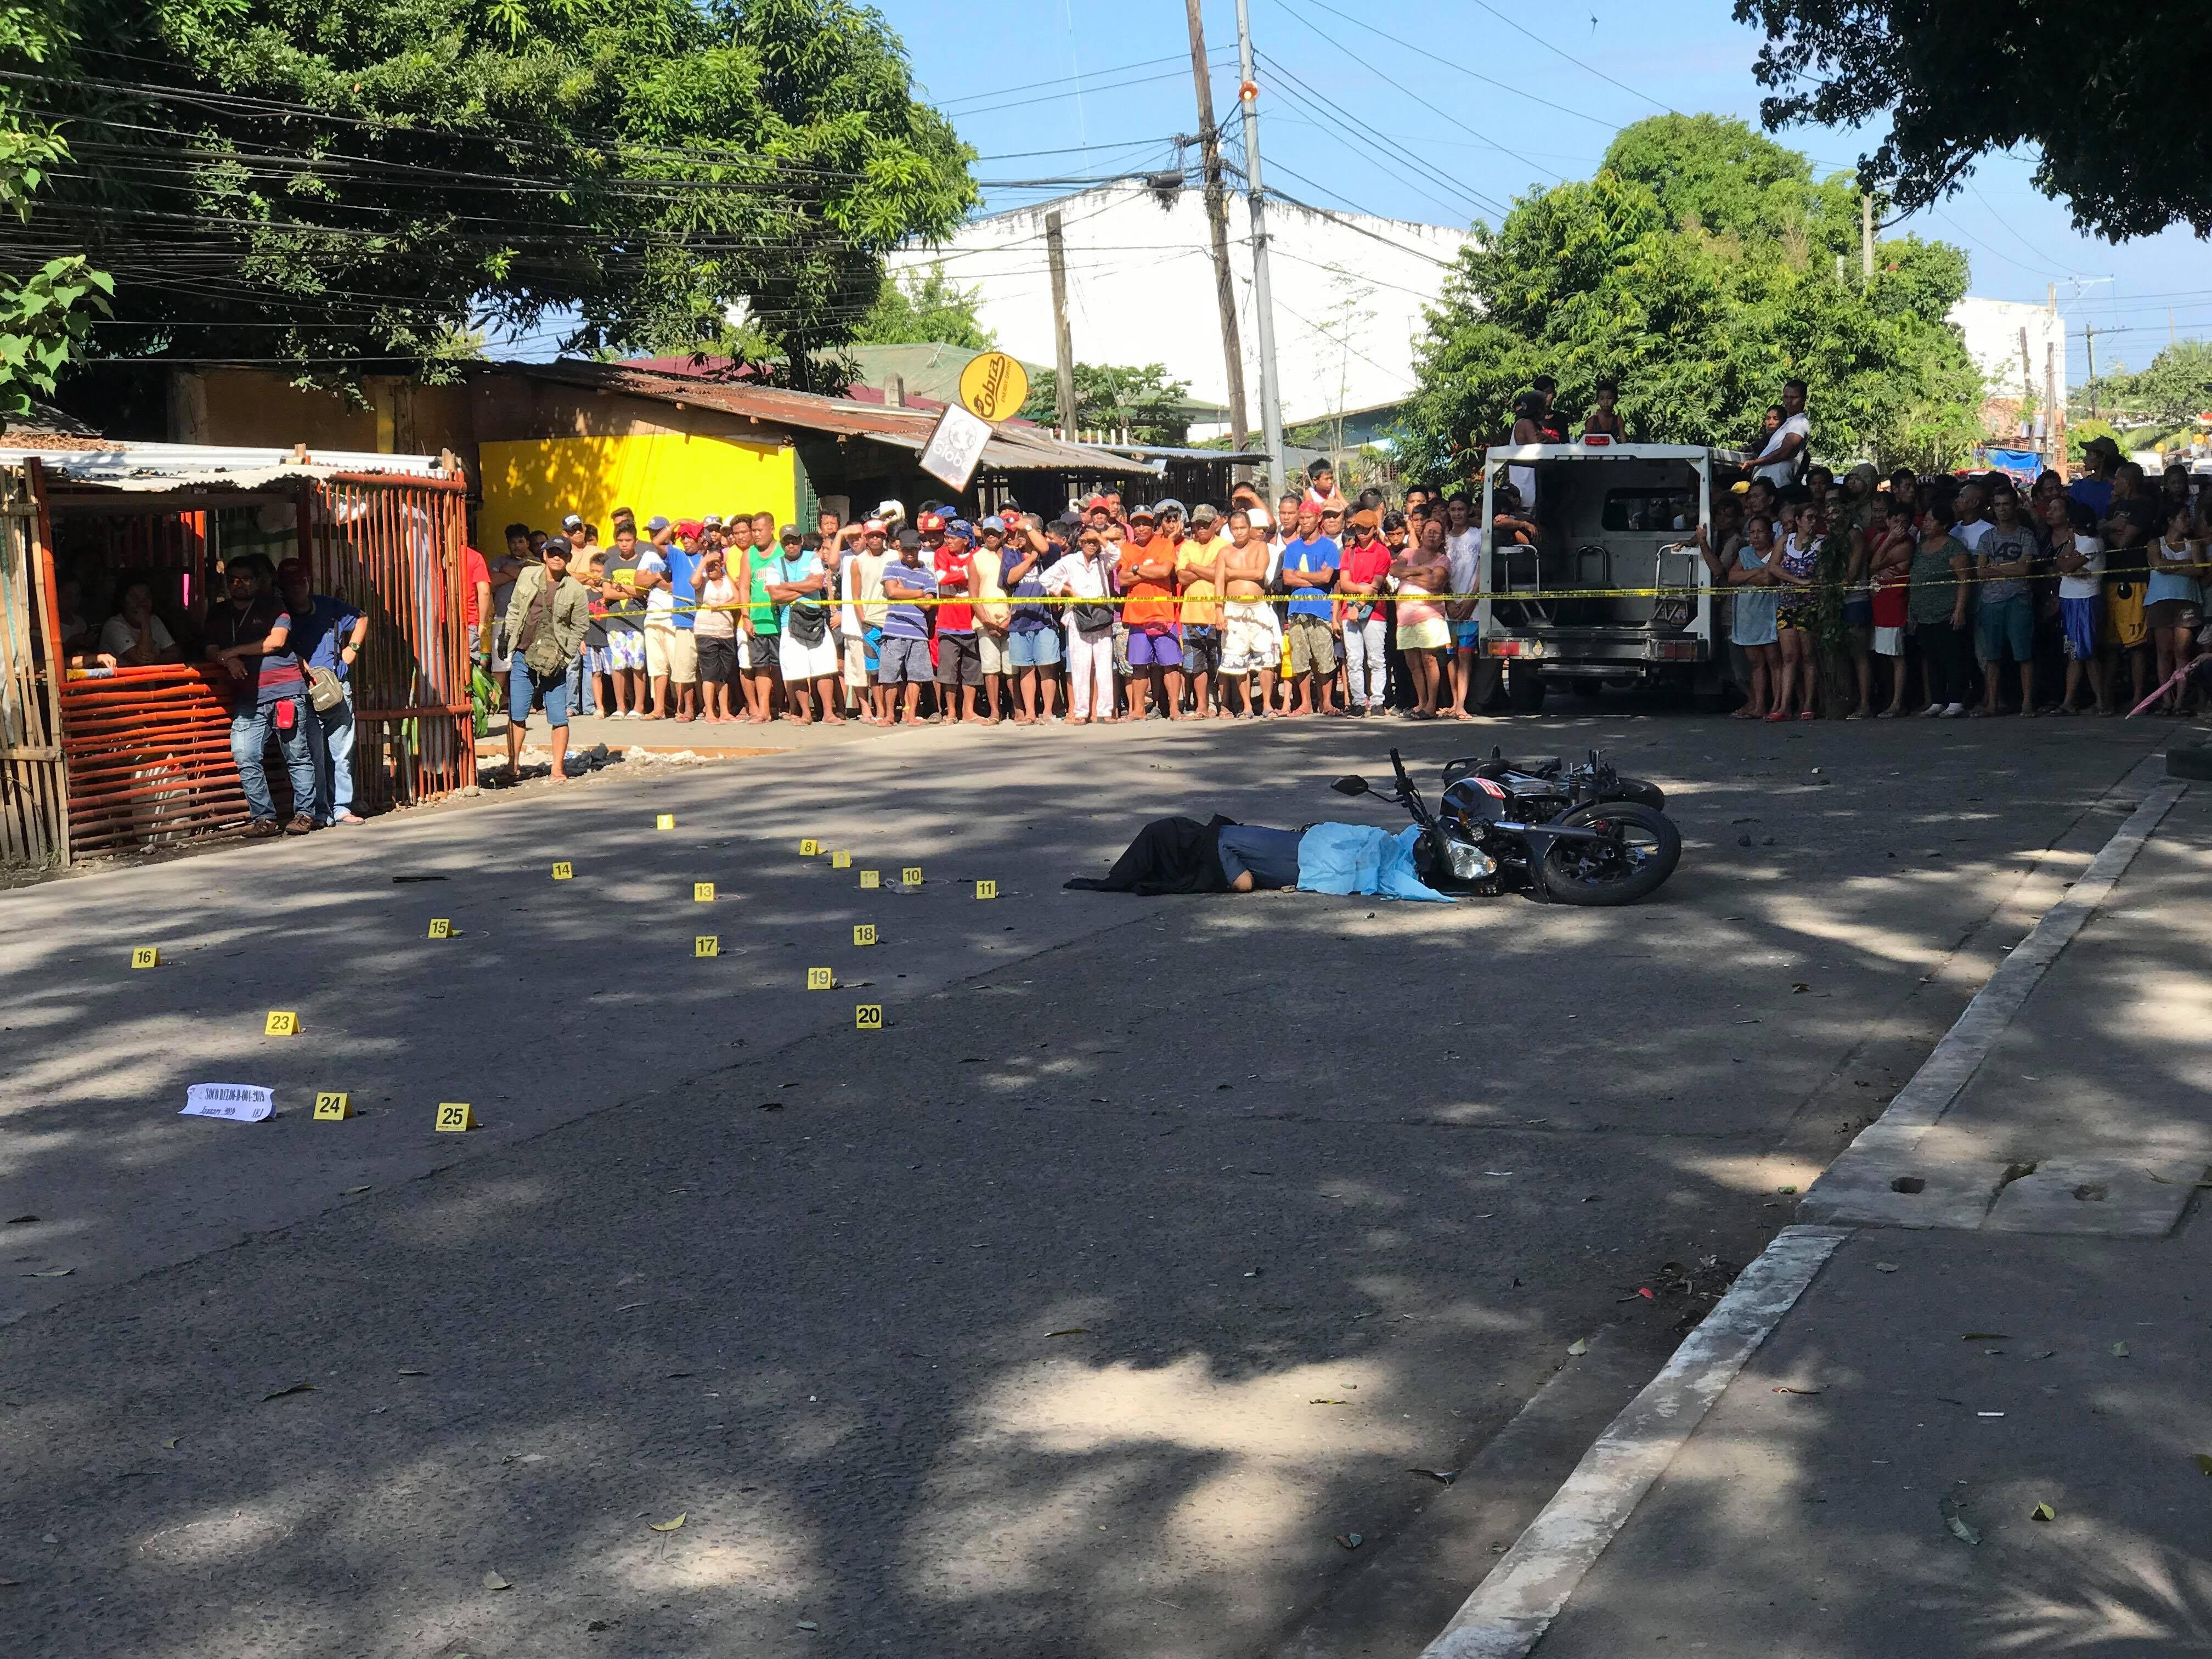 SPO4 Oscar Exaltado, deputy police chief of Bacolod City Police Office (BCPO) Station 6 slumps on the ground after he was shot dead by unidentified gunmen while driving to work about 8 a.m. on Saturday at Barangay Singcang Airport, Bacolod City. Photo by radio station dyEZ